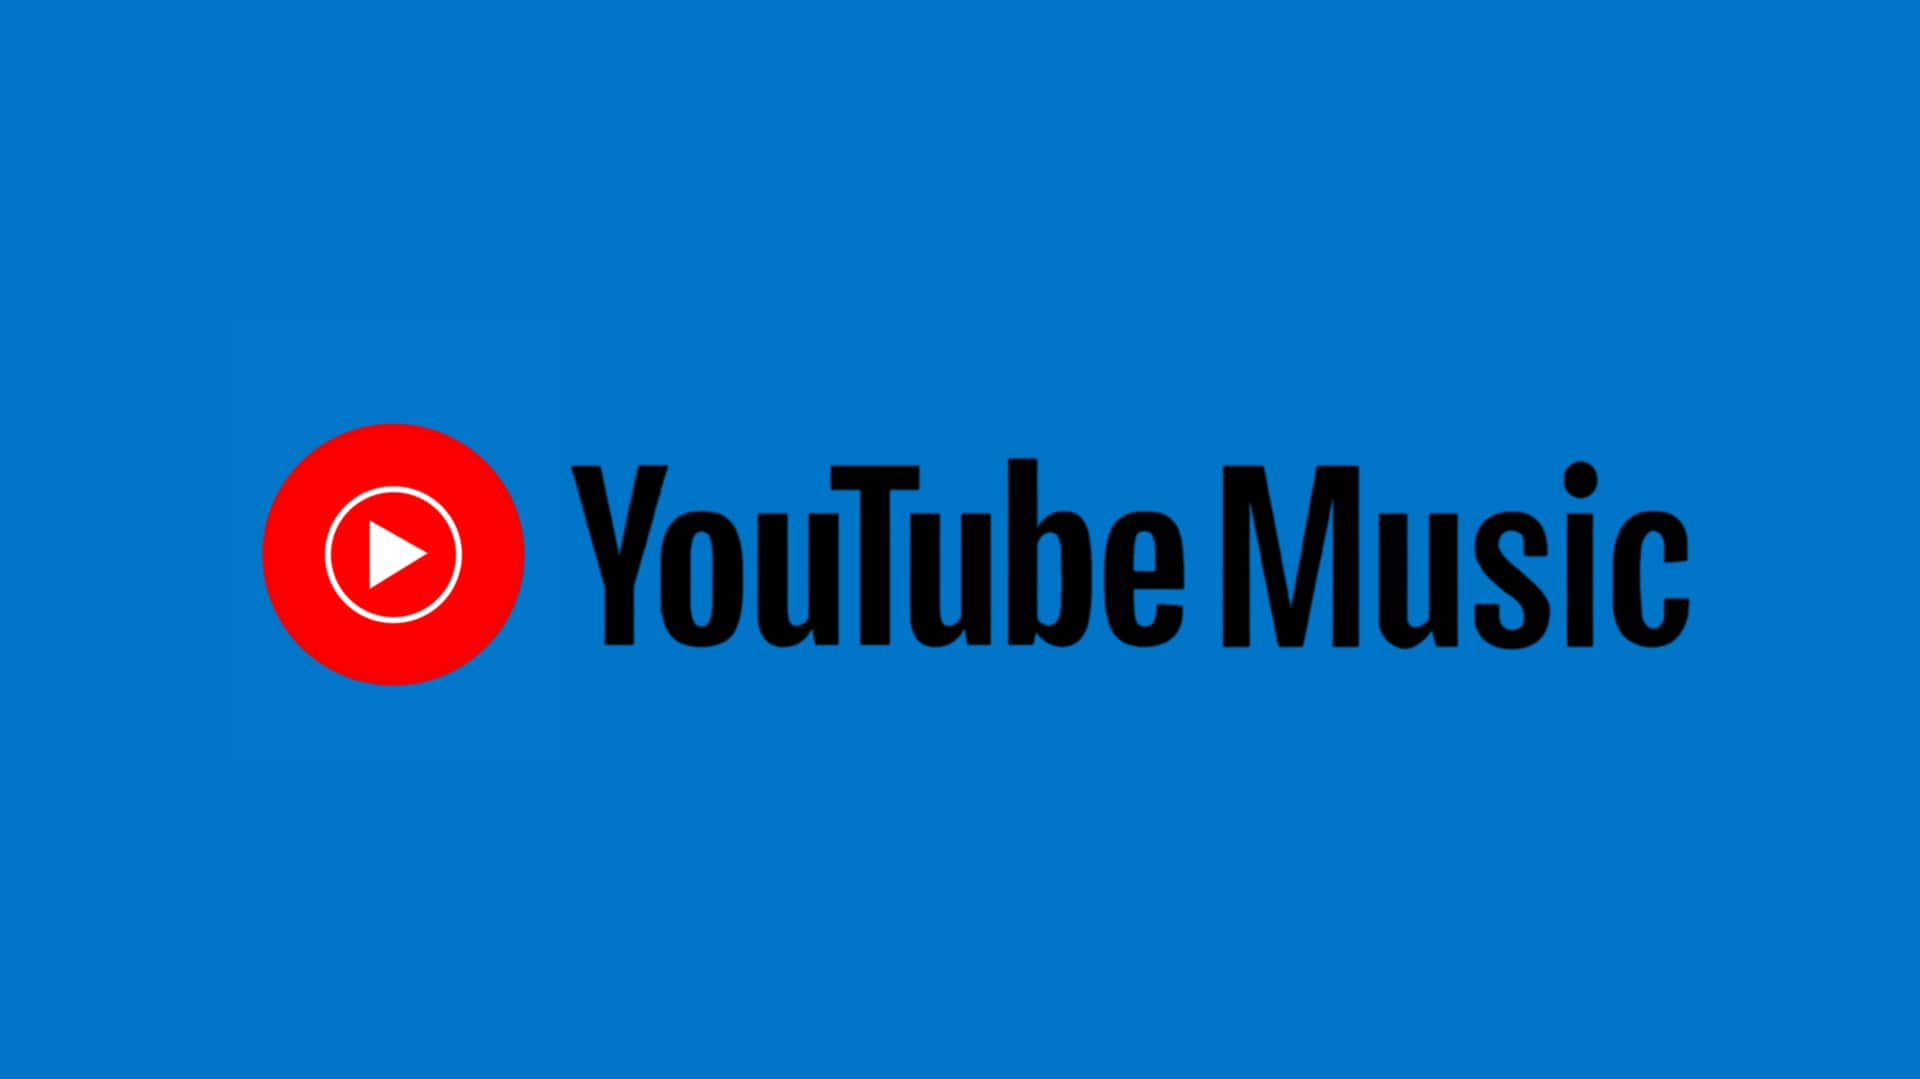 YouTube Music now supports podcasts, signaling end of Google Podcasts